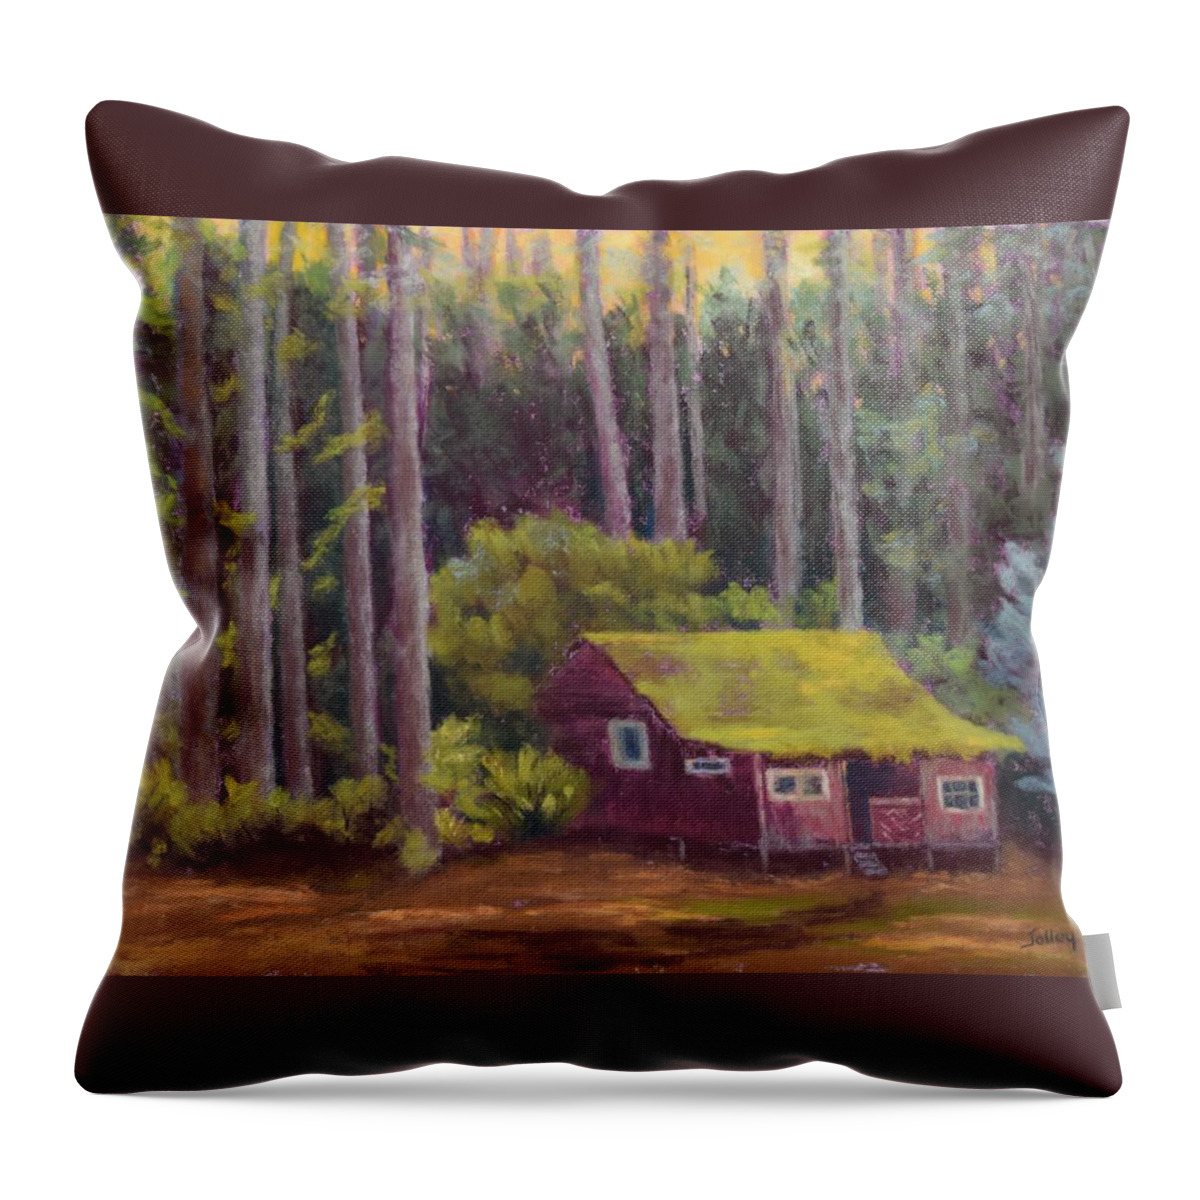 Cabin Throw Pillow featuring the painting Shady Grove by Nancy Jolley